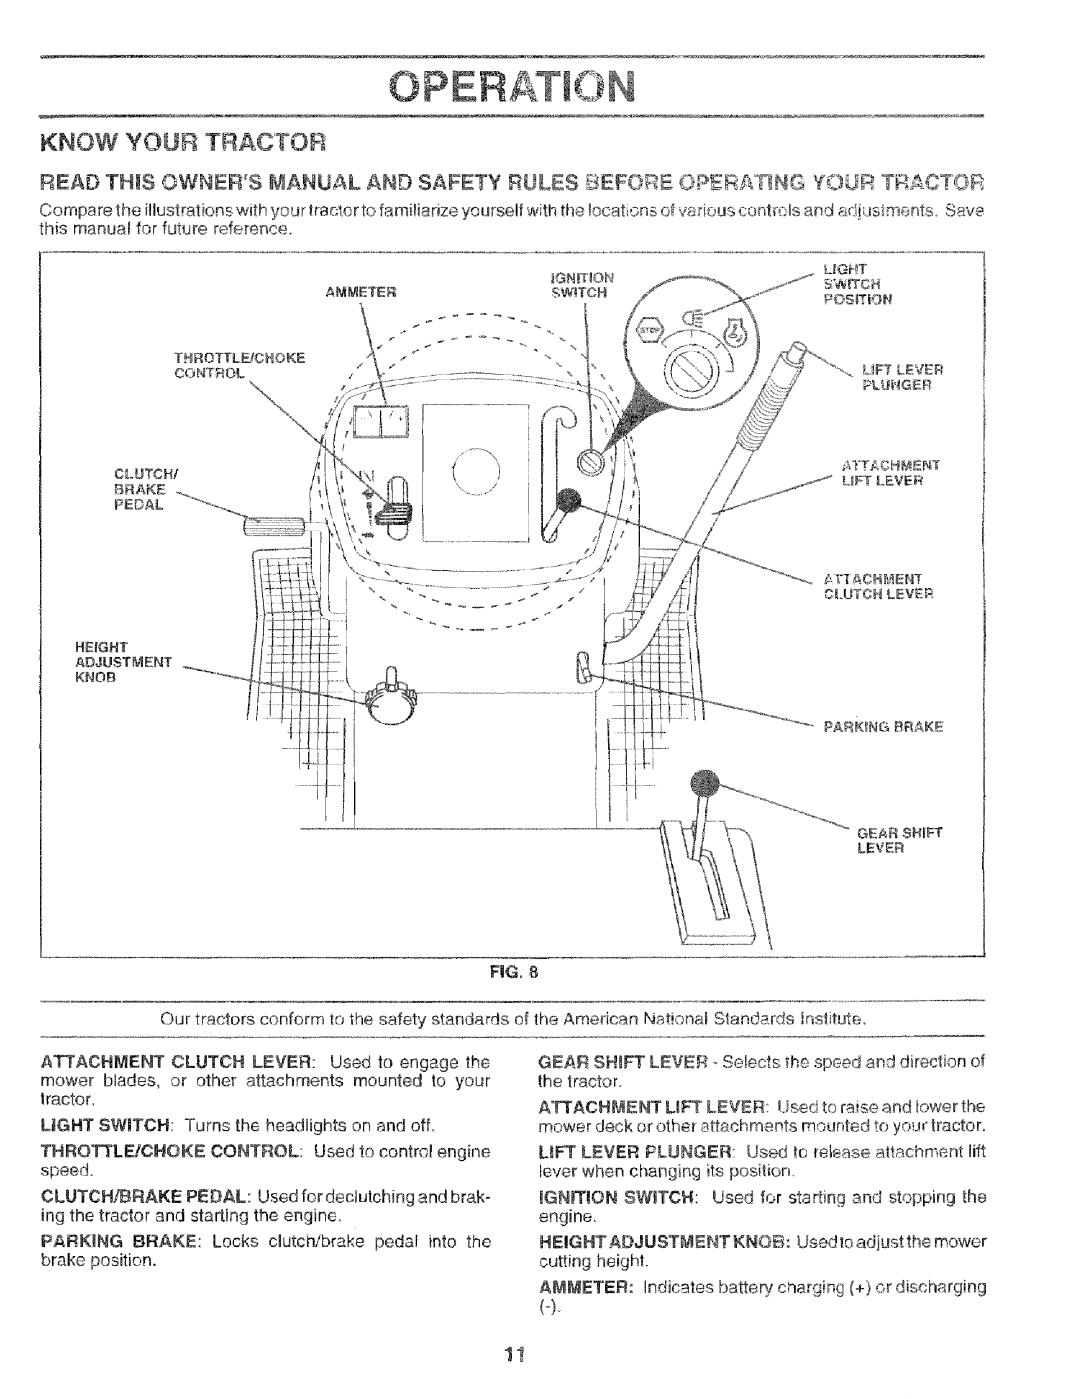 Craftsman 917.256544 owner manual Know Your Tractor 